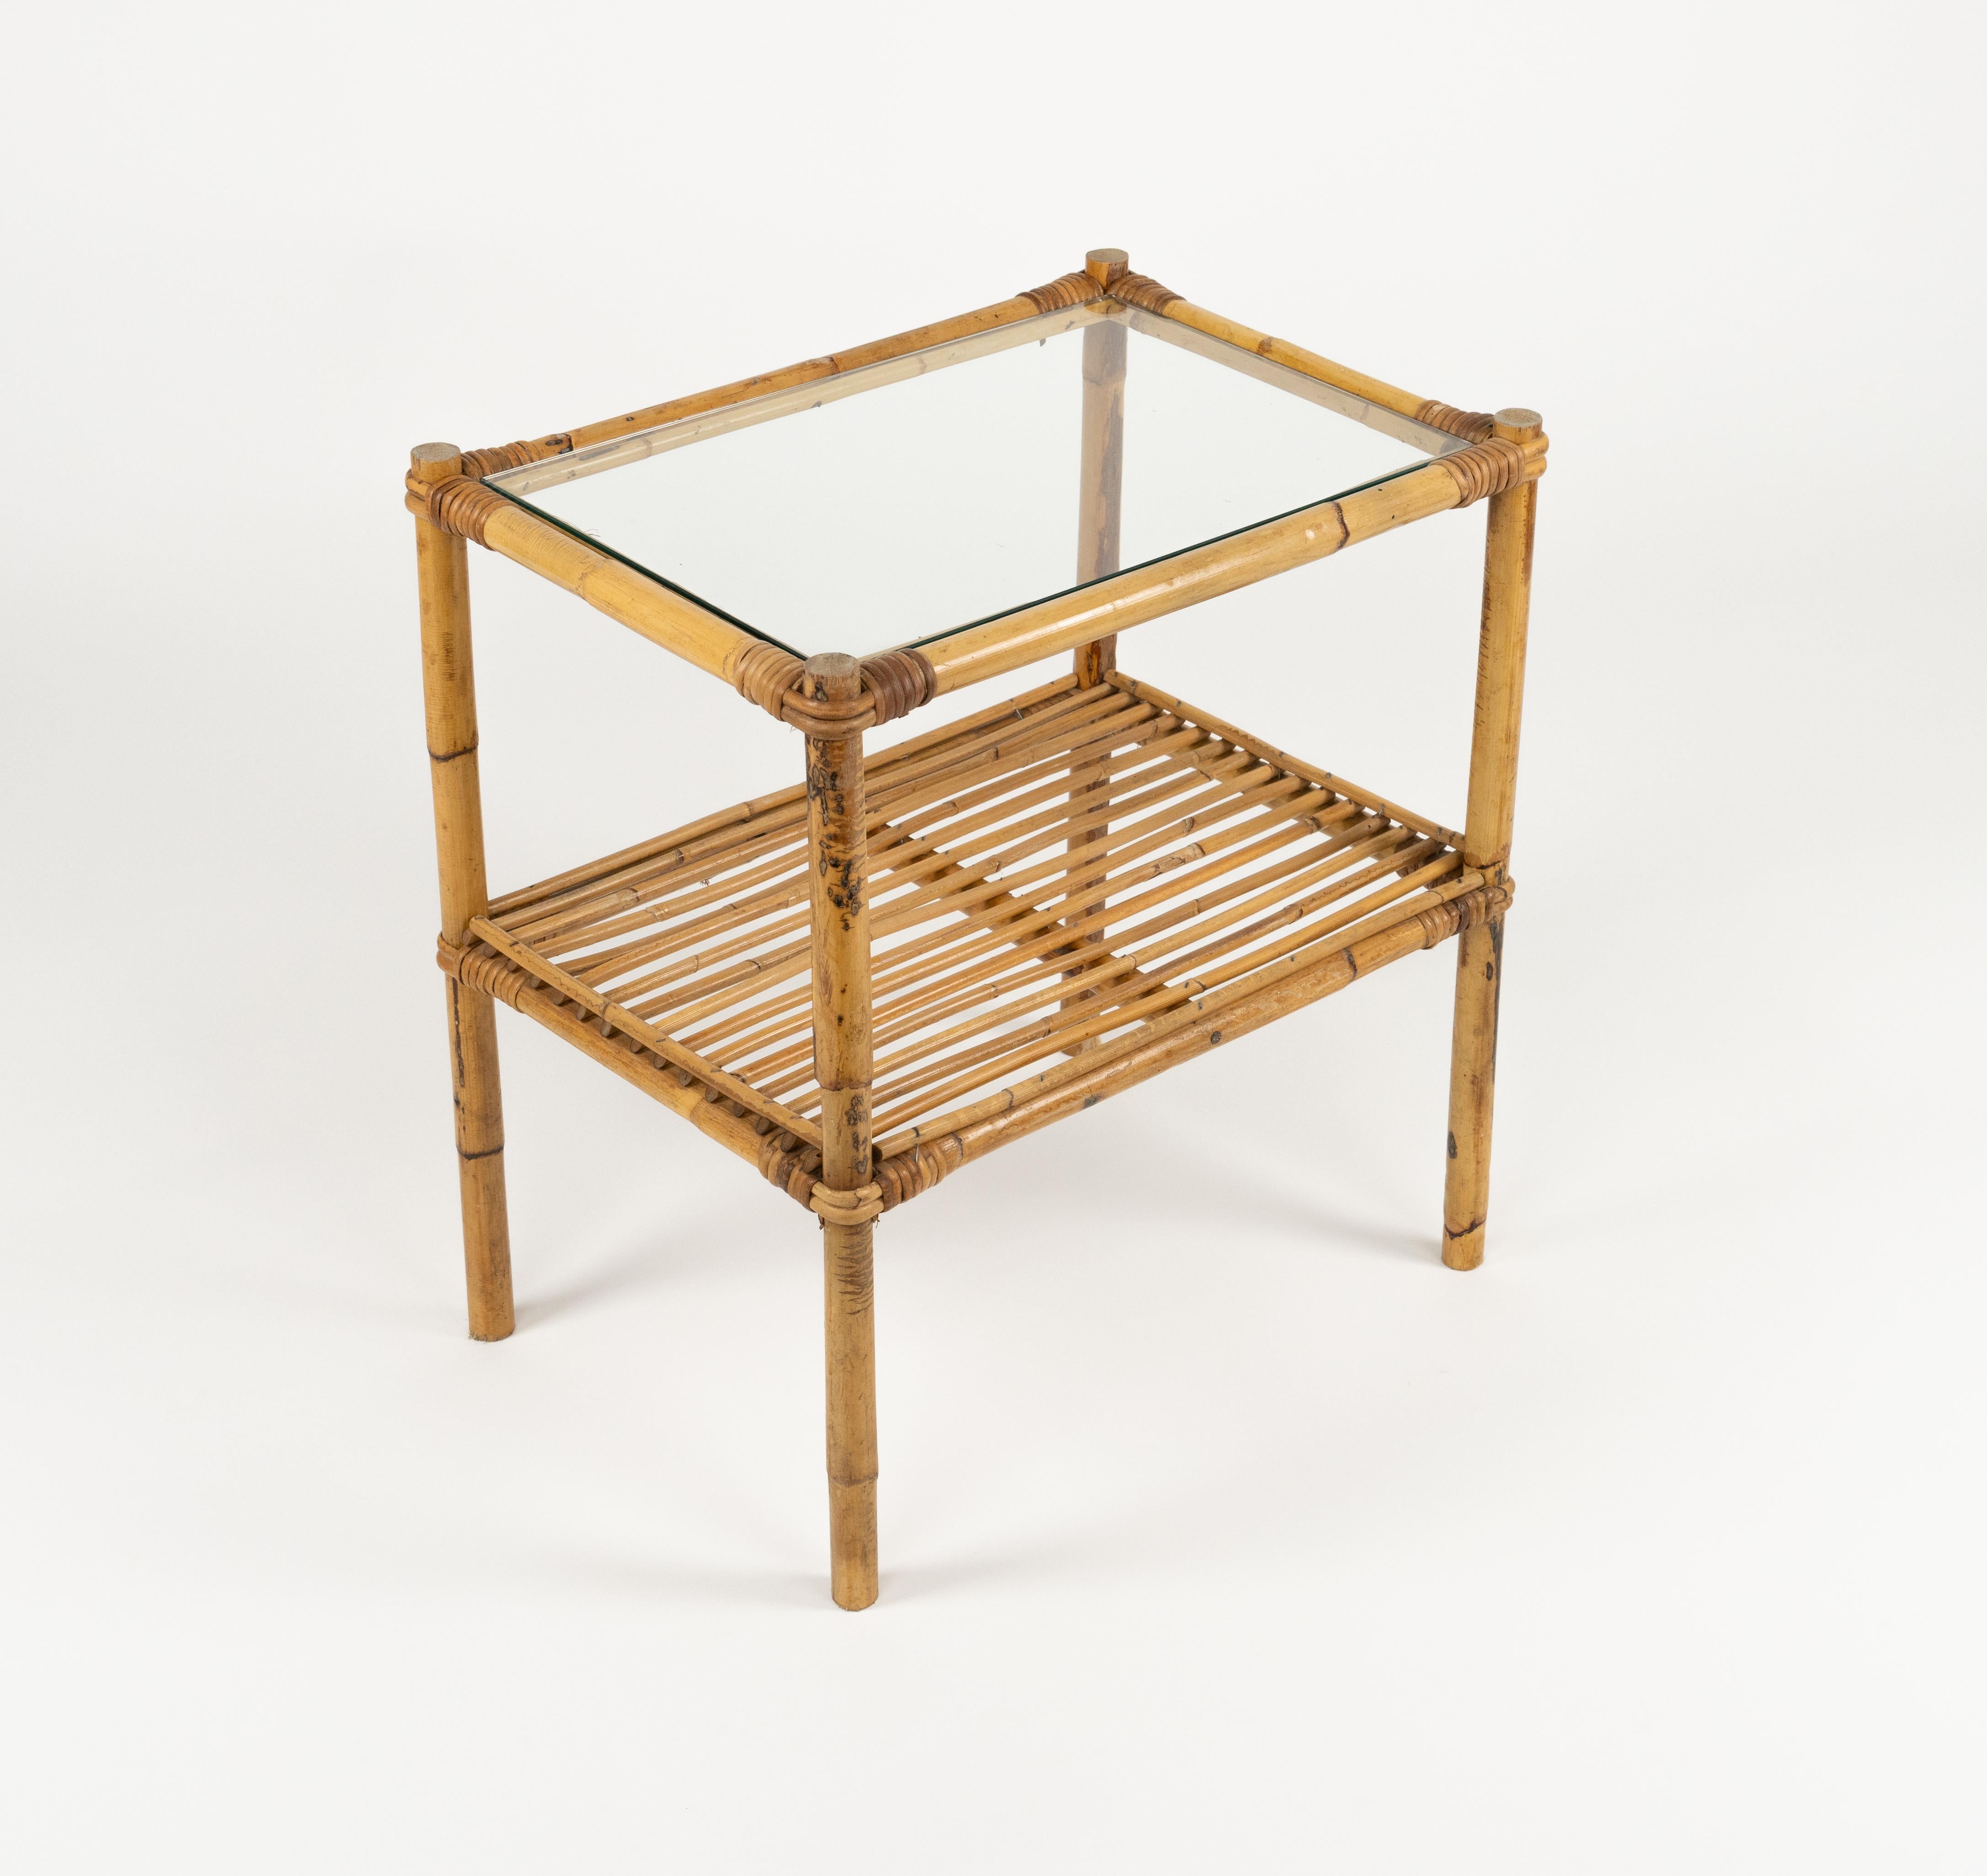 Midcentury beautiful side table or nightstand in bamboo and rattan with glass top.

Made in Italy in the 1970s.